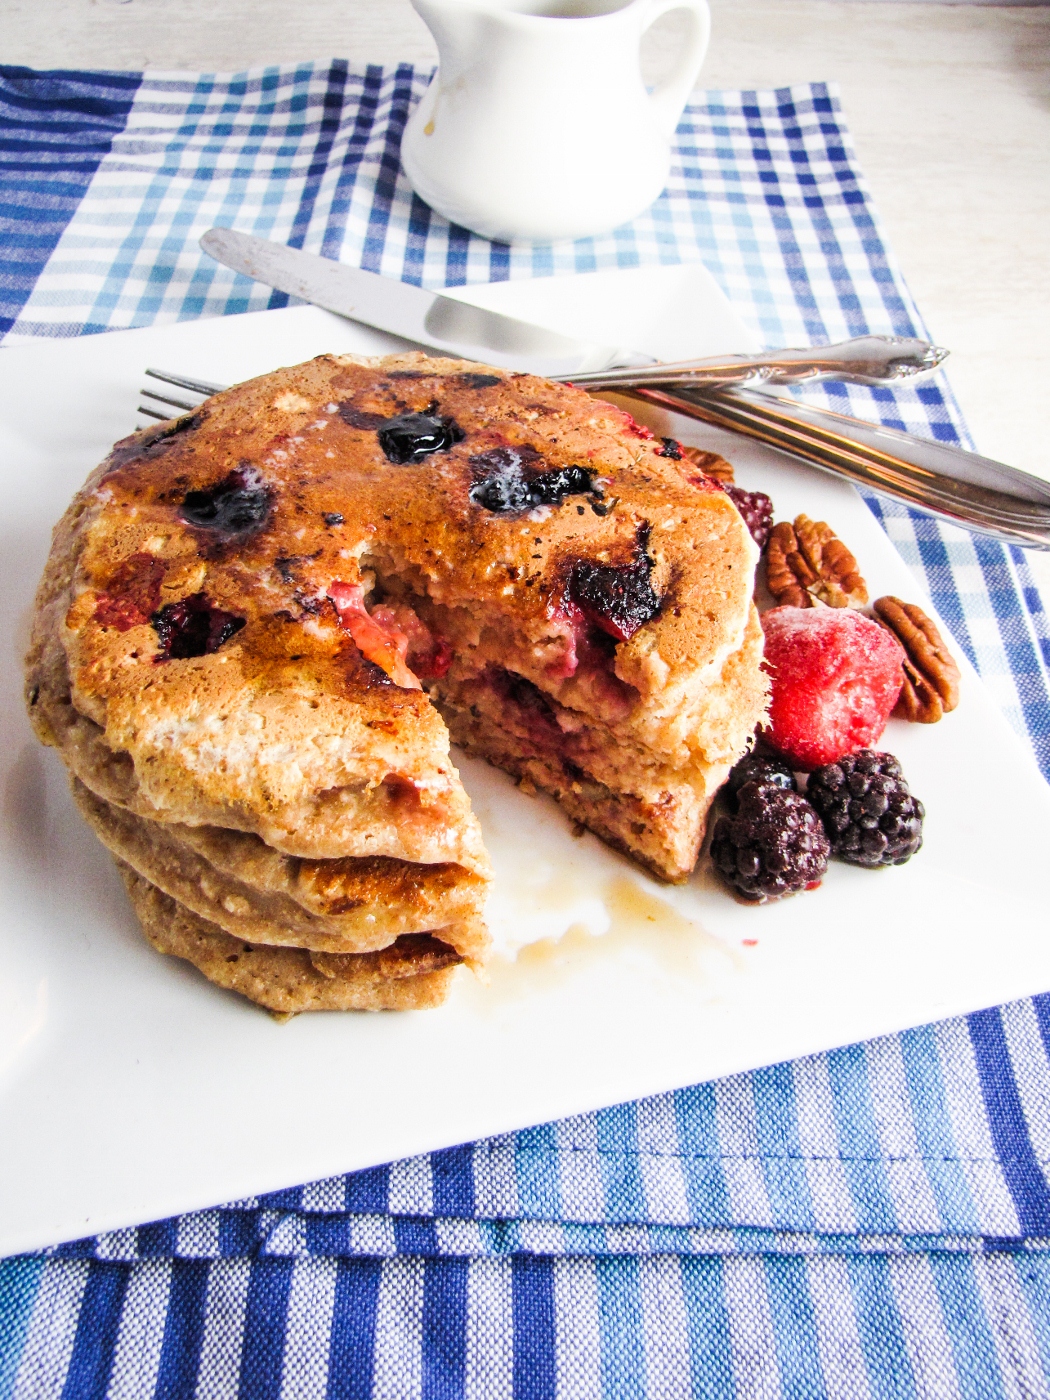 Healthy Winter Recipes - Whole Wheat Fruit and Nut Pancakes